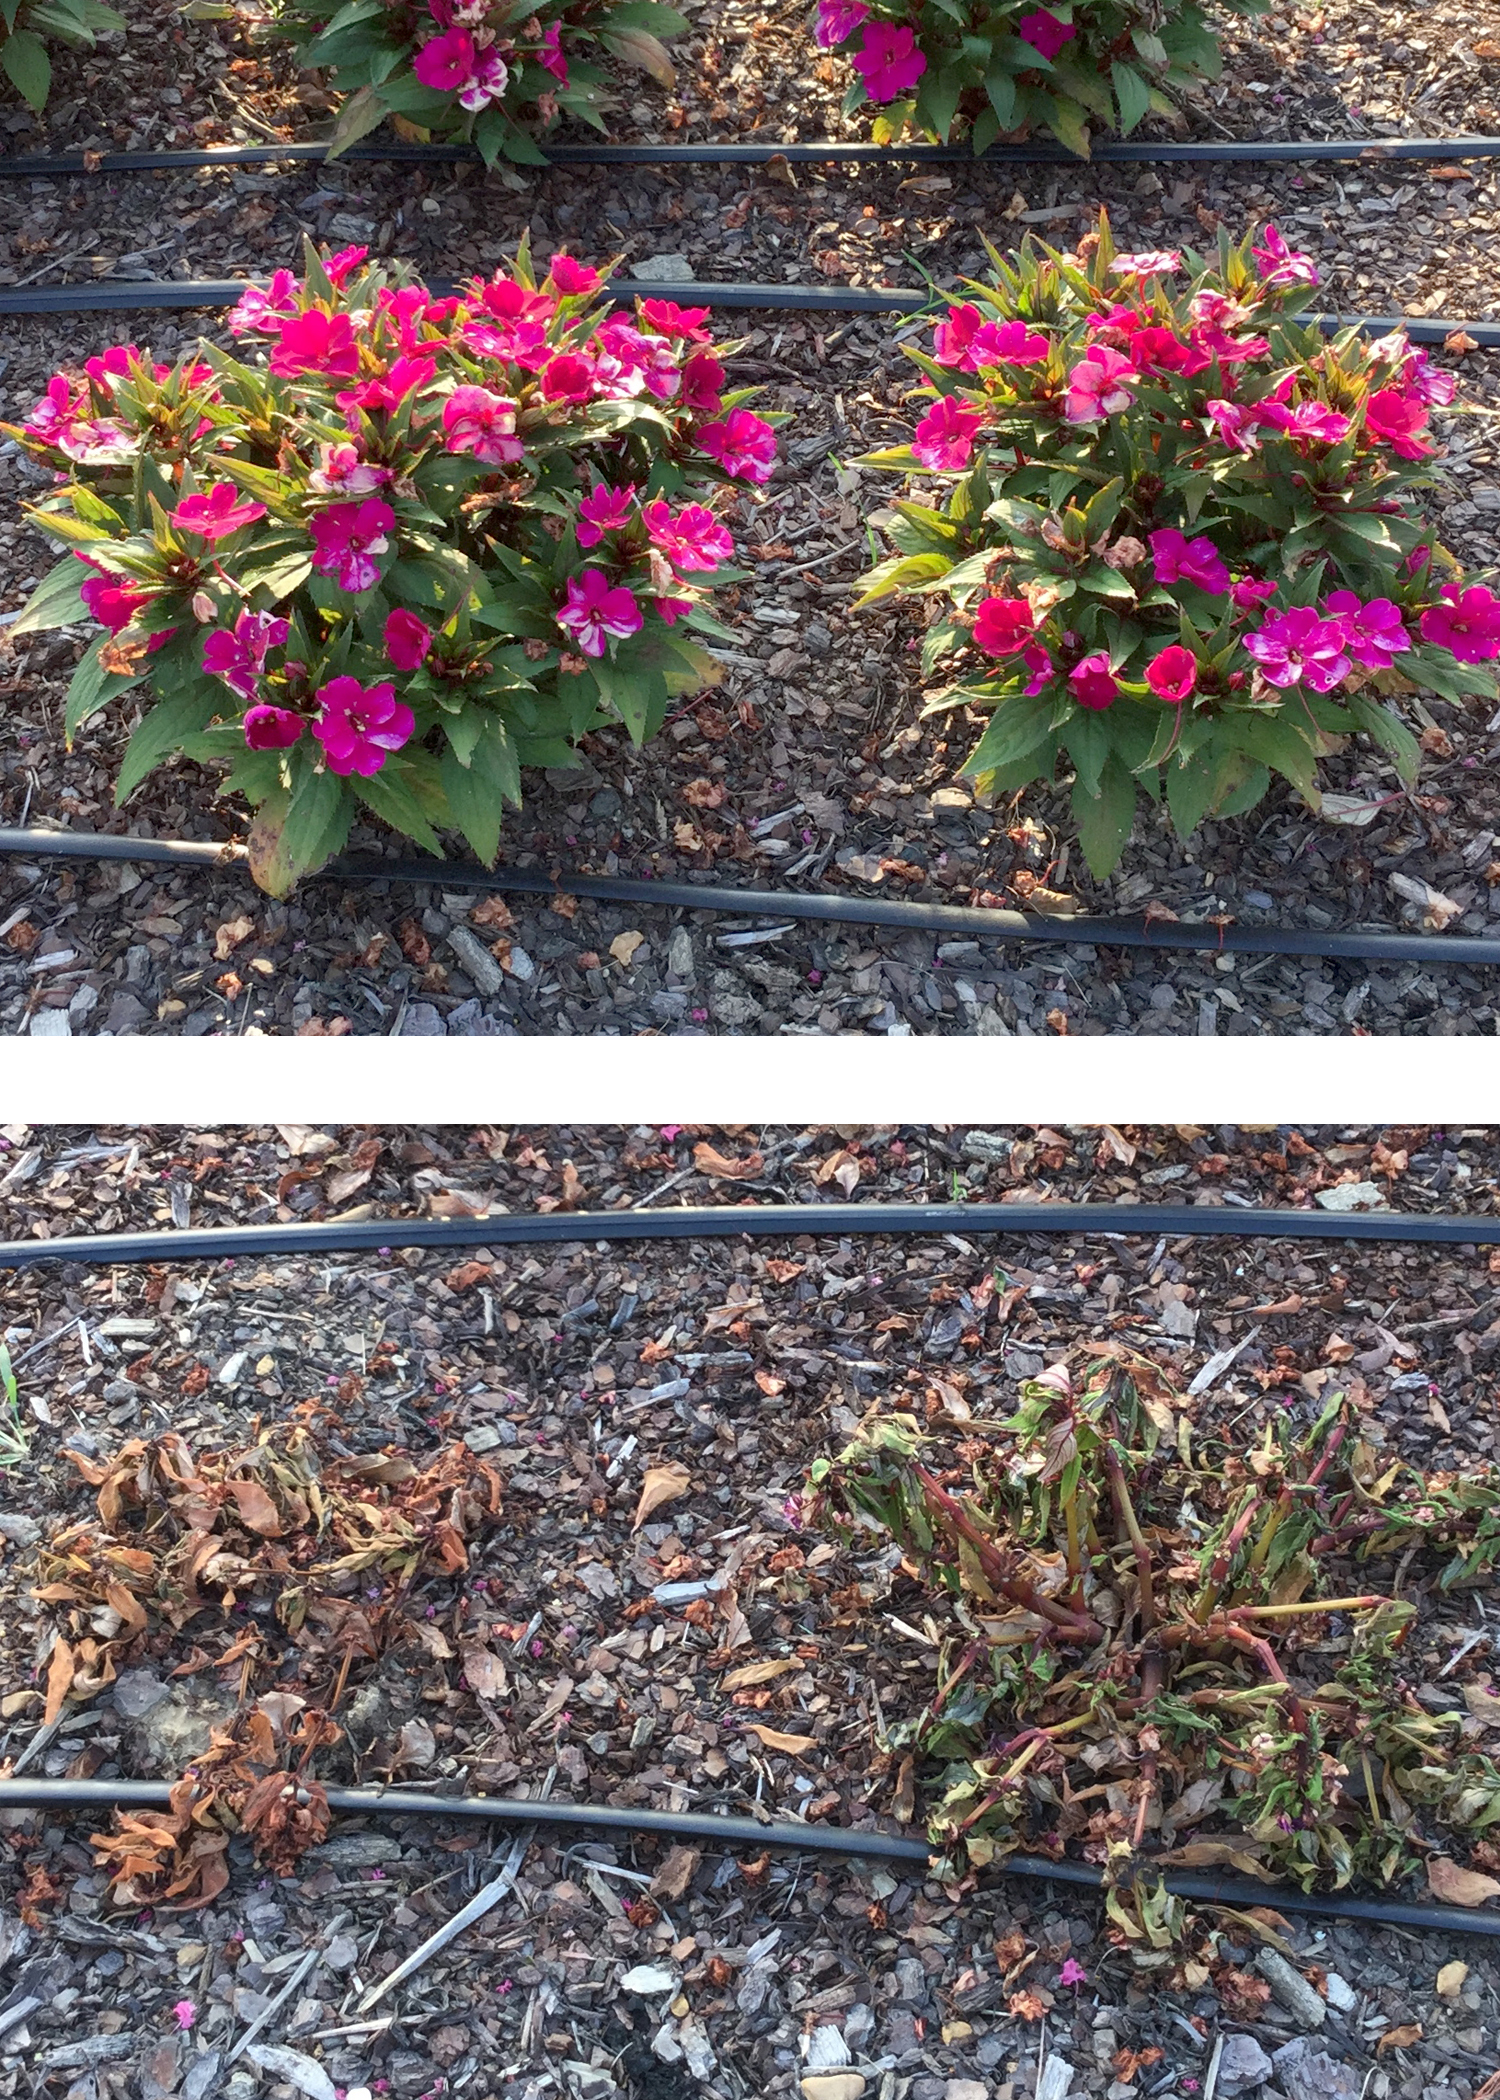 On July 24, 2015, these SunPatiens, top, were thriving at the Mississippi State University Truck Crops Branch Experiment Station in Crystal Springs, Mississippi. They were dead when photographed, bottom, Aug. 7, 2015. The flowers were killed by the Macrophomina phaseolina pathogen, which had never before been seen in impatiens (Photo by MSU Extension Service/Clay Cheroni)